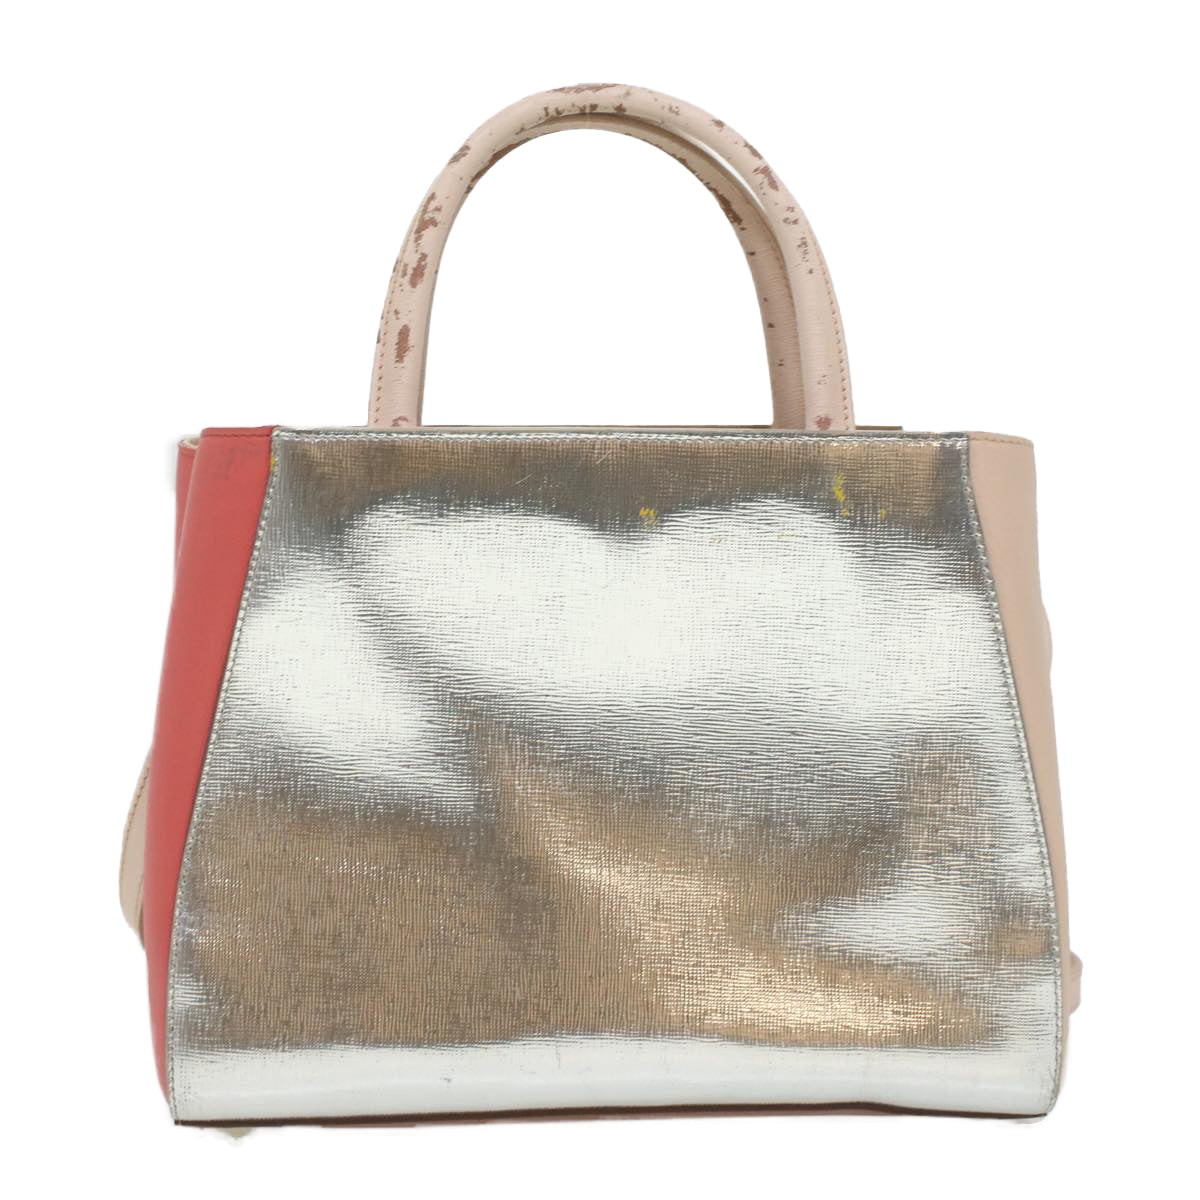 FENDI Hand Bag Leather Pink Silver beige Auth cl260 - 0